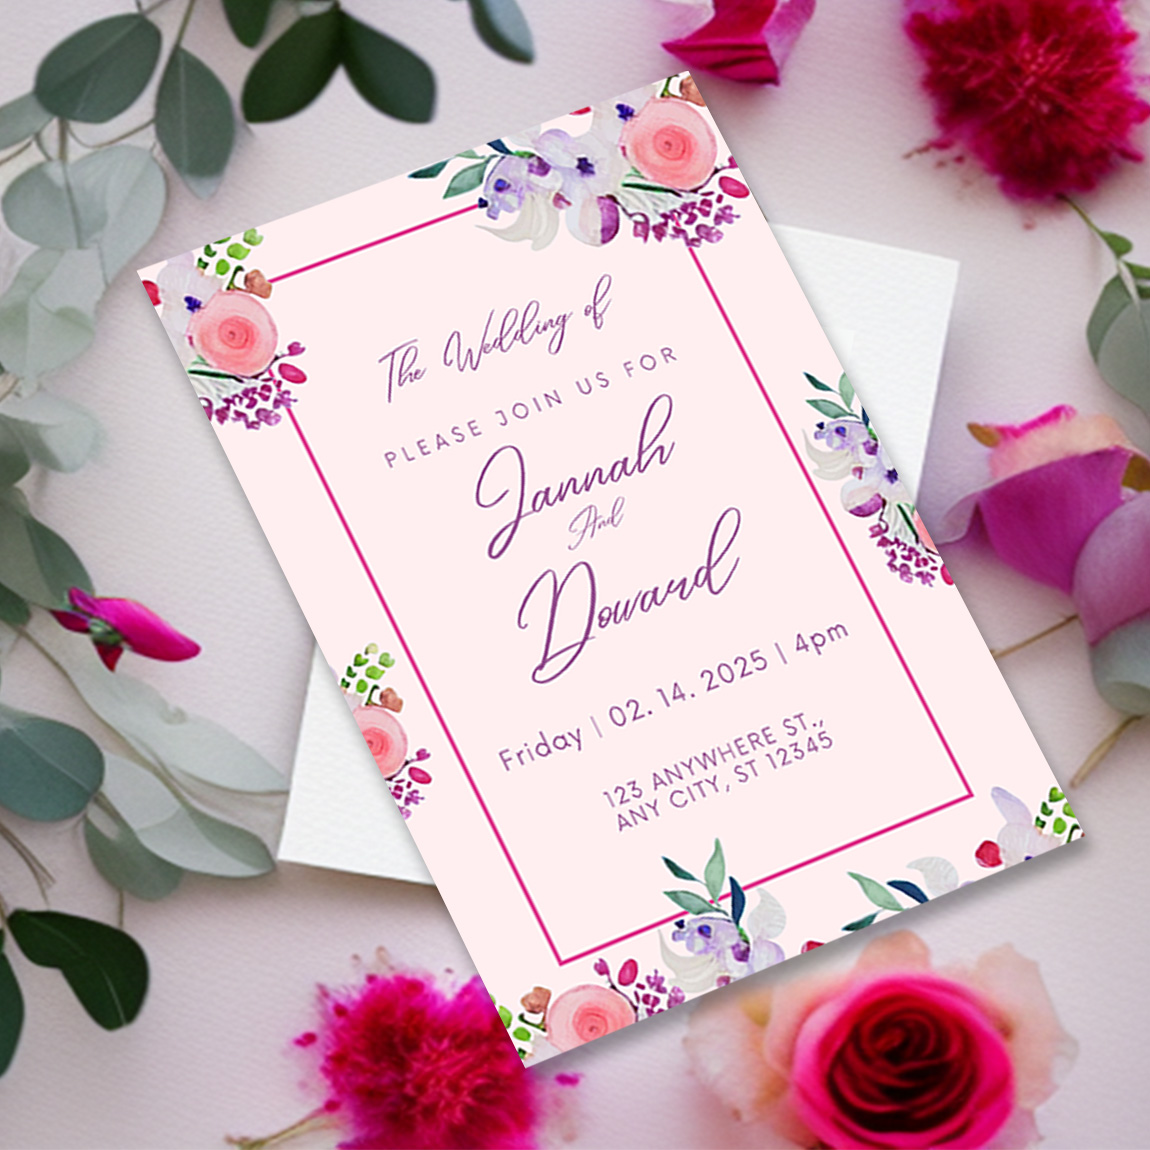 Image with charming wedding invitation card with watercolor flowers.